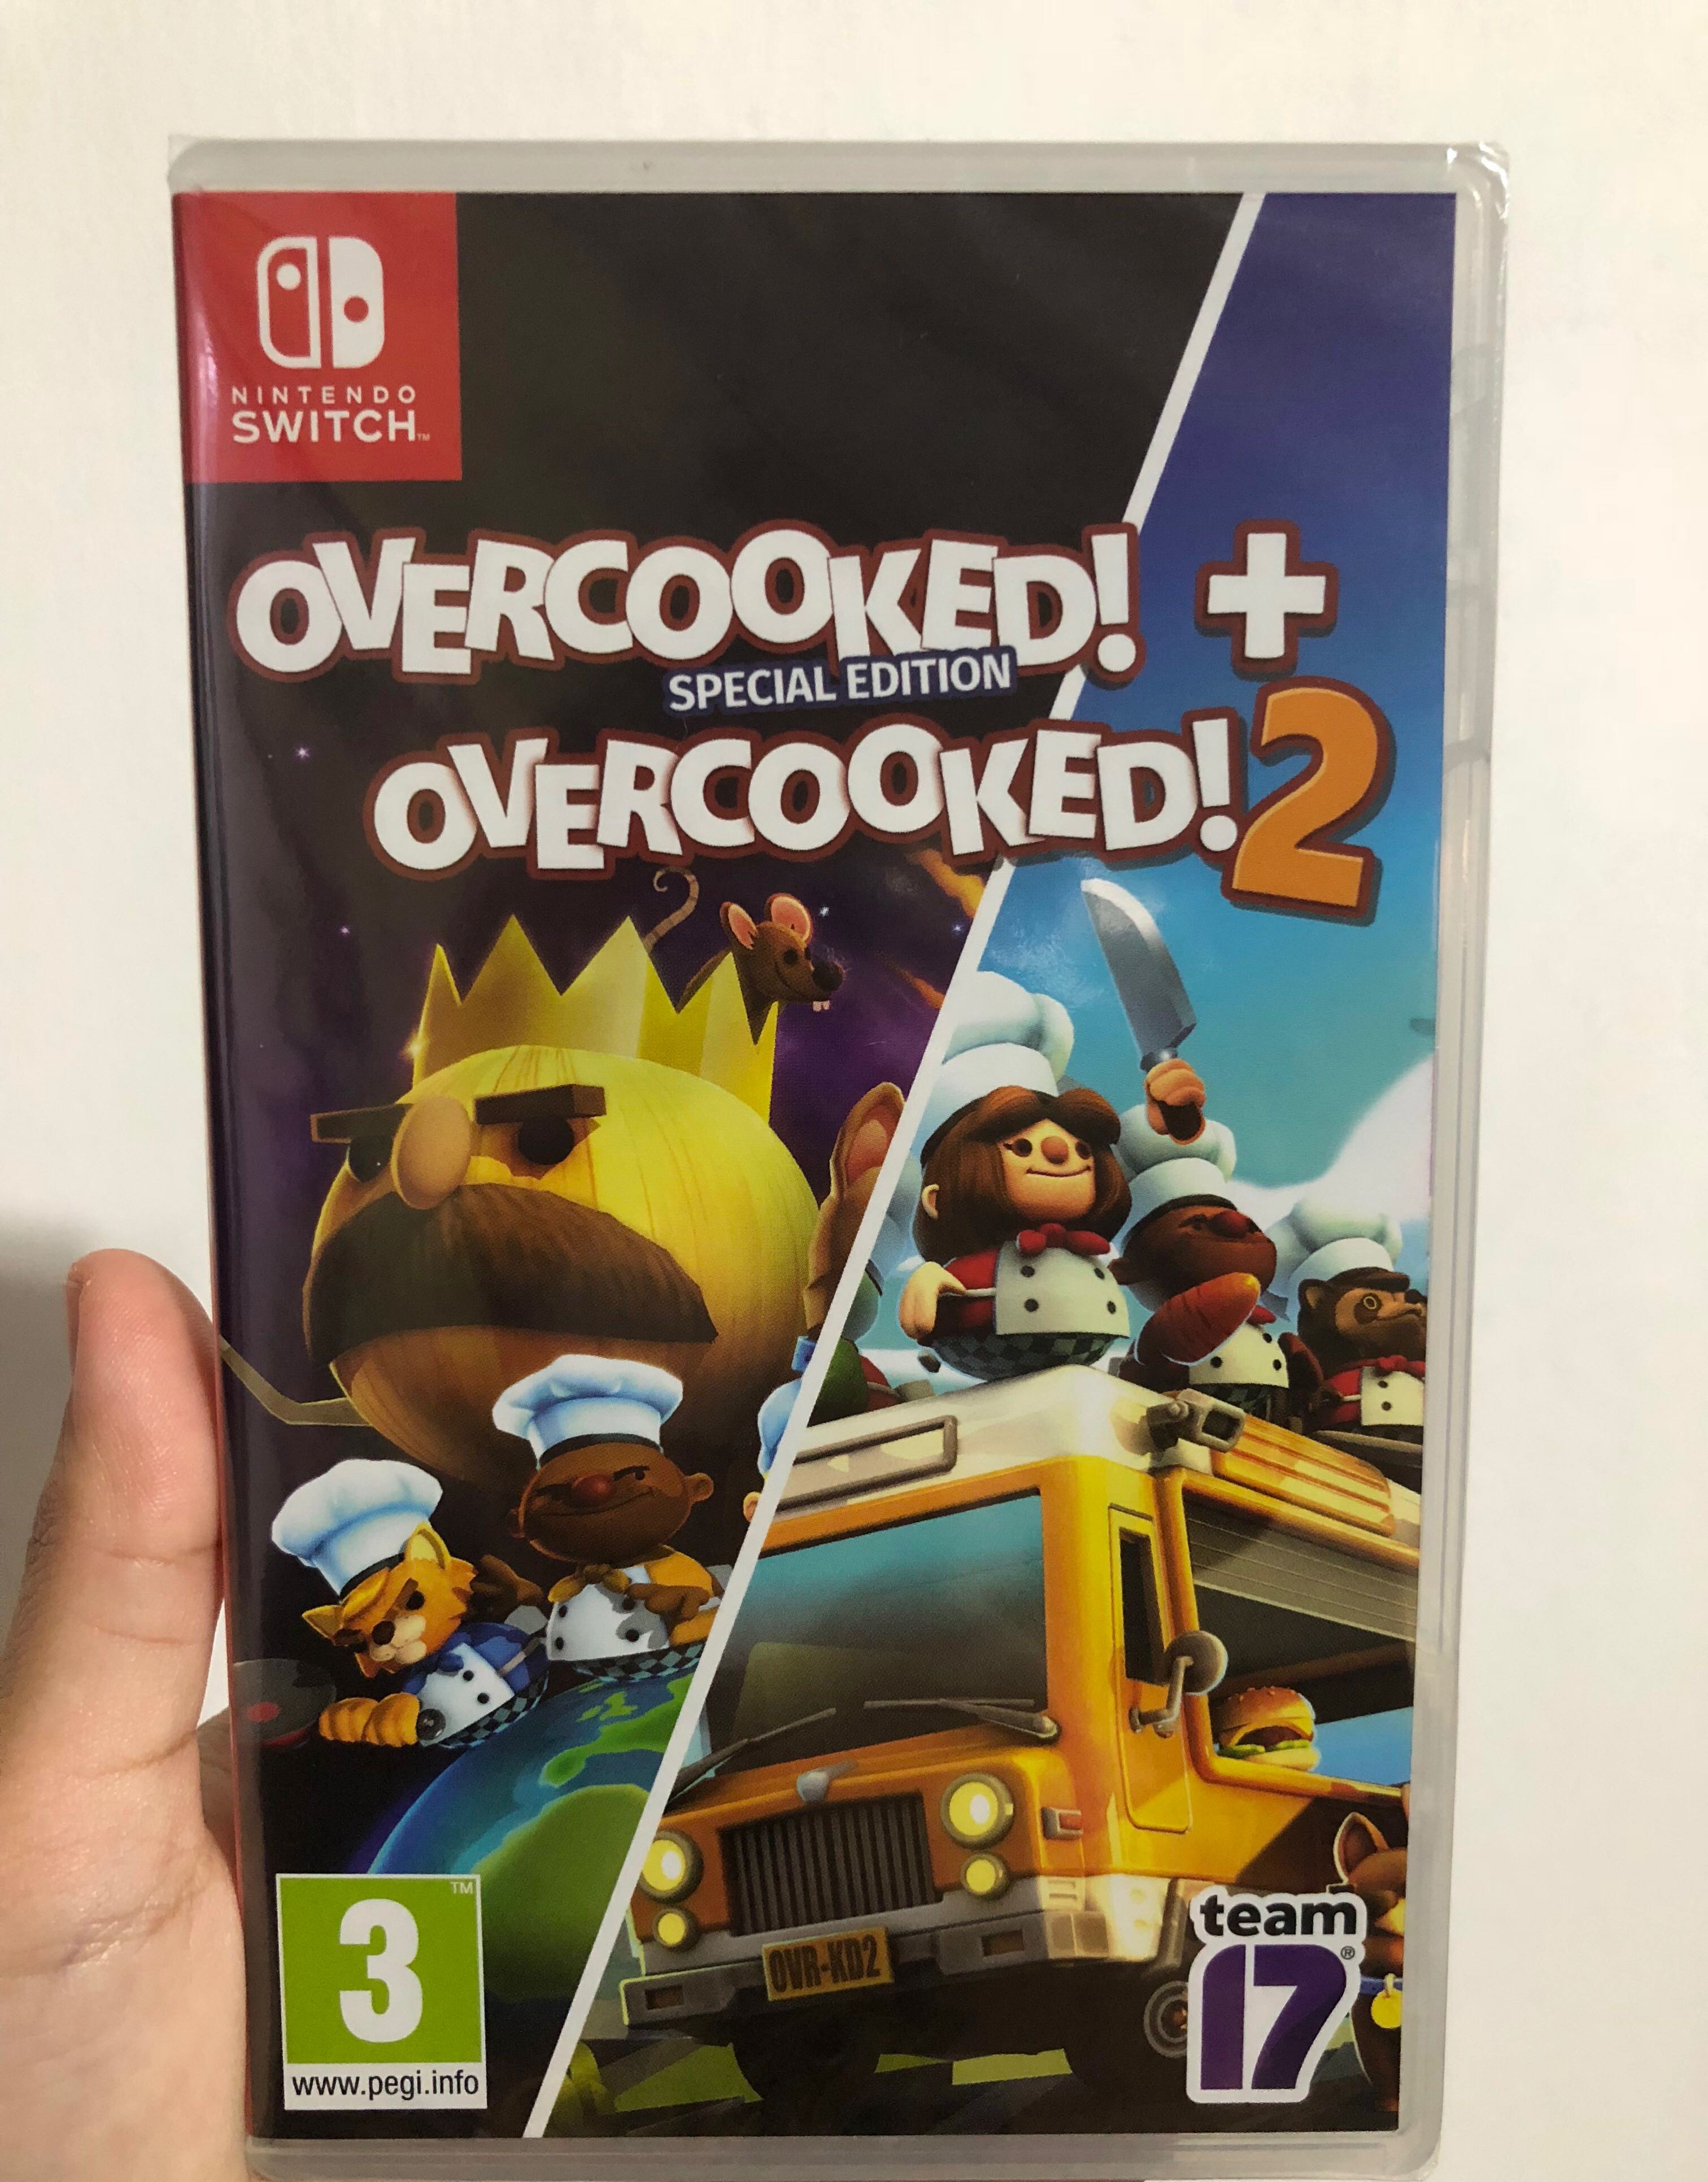 Nintendo Switch Overcooked Special Edition Overcooked 2 Toys And Games Video Gaming Video